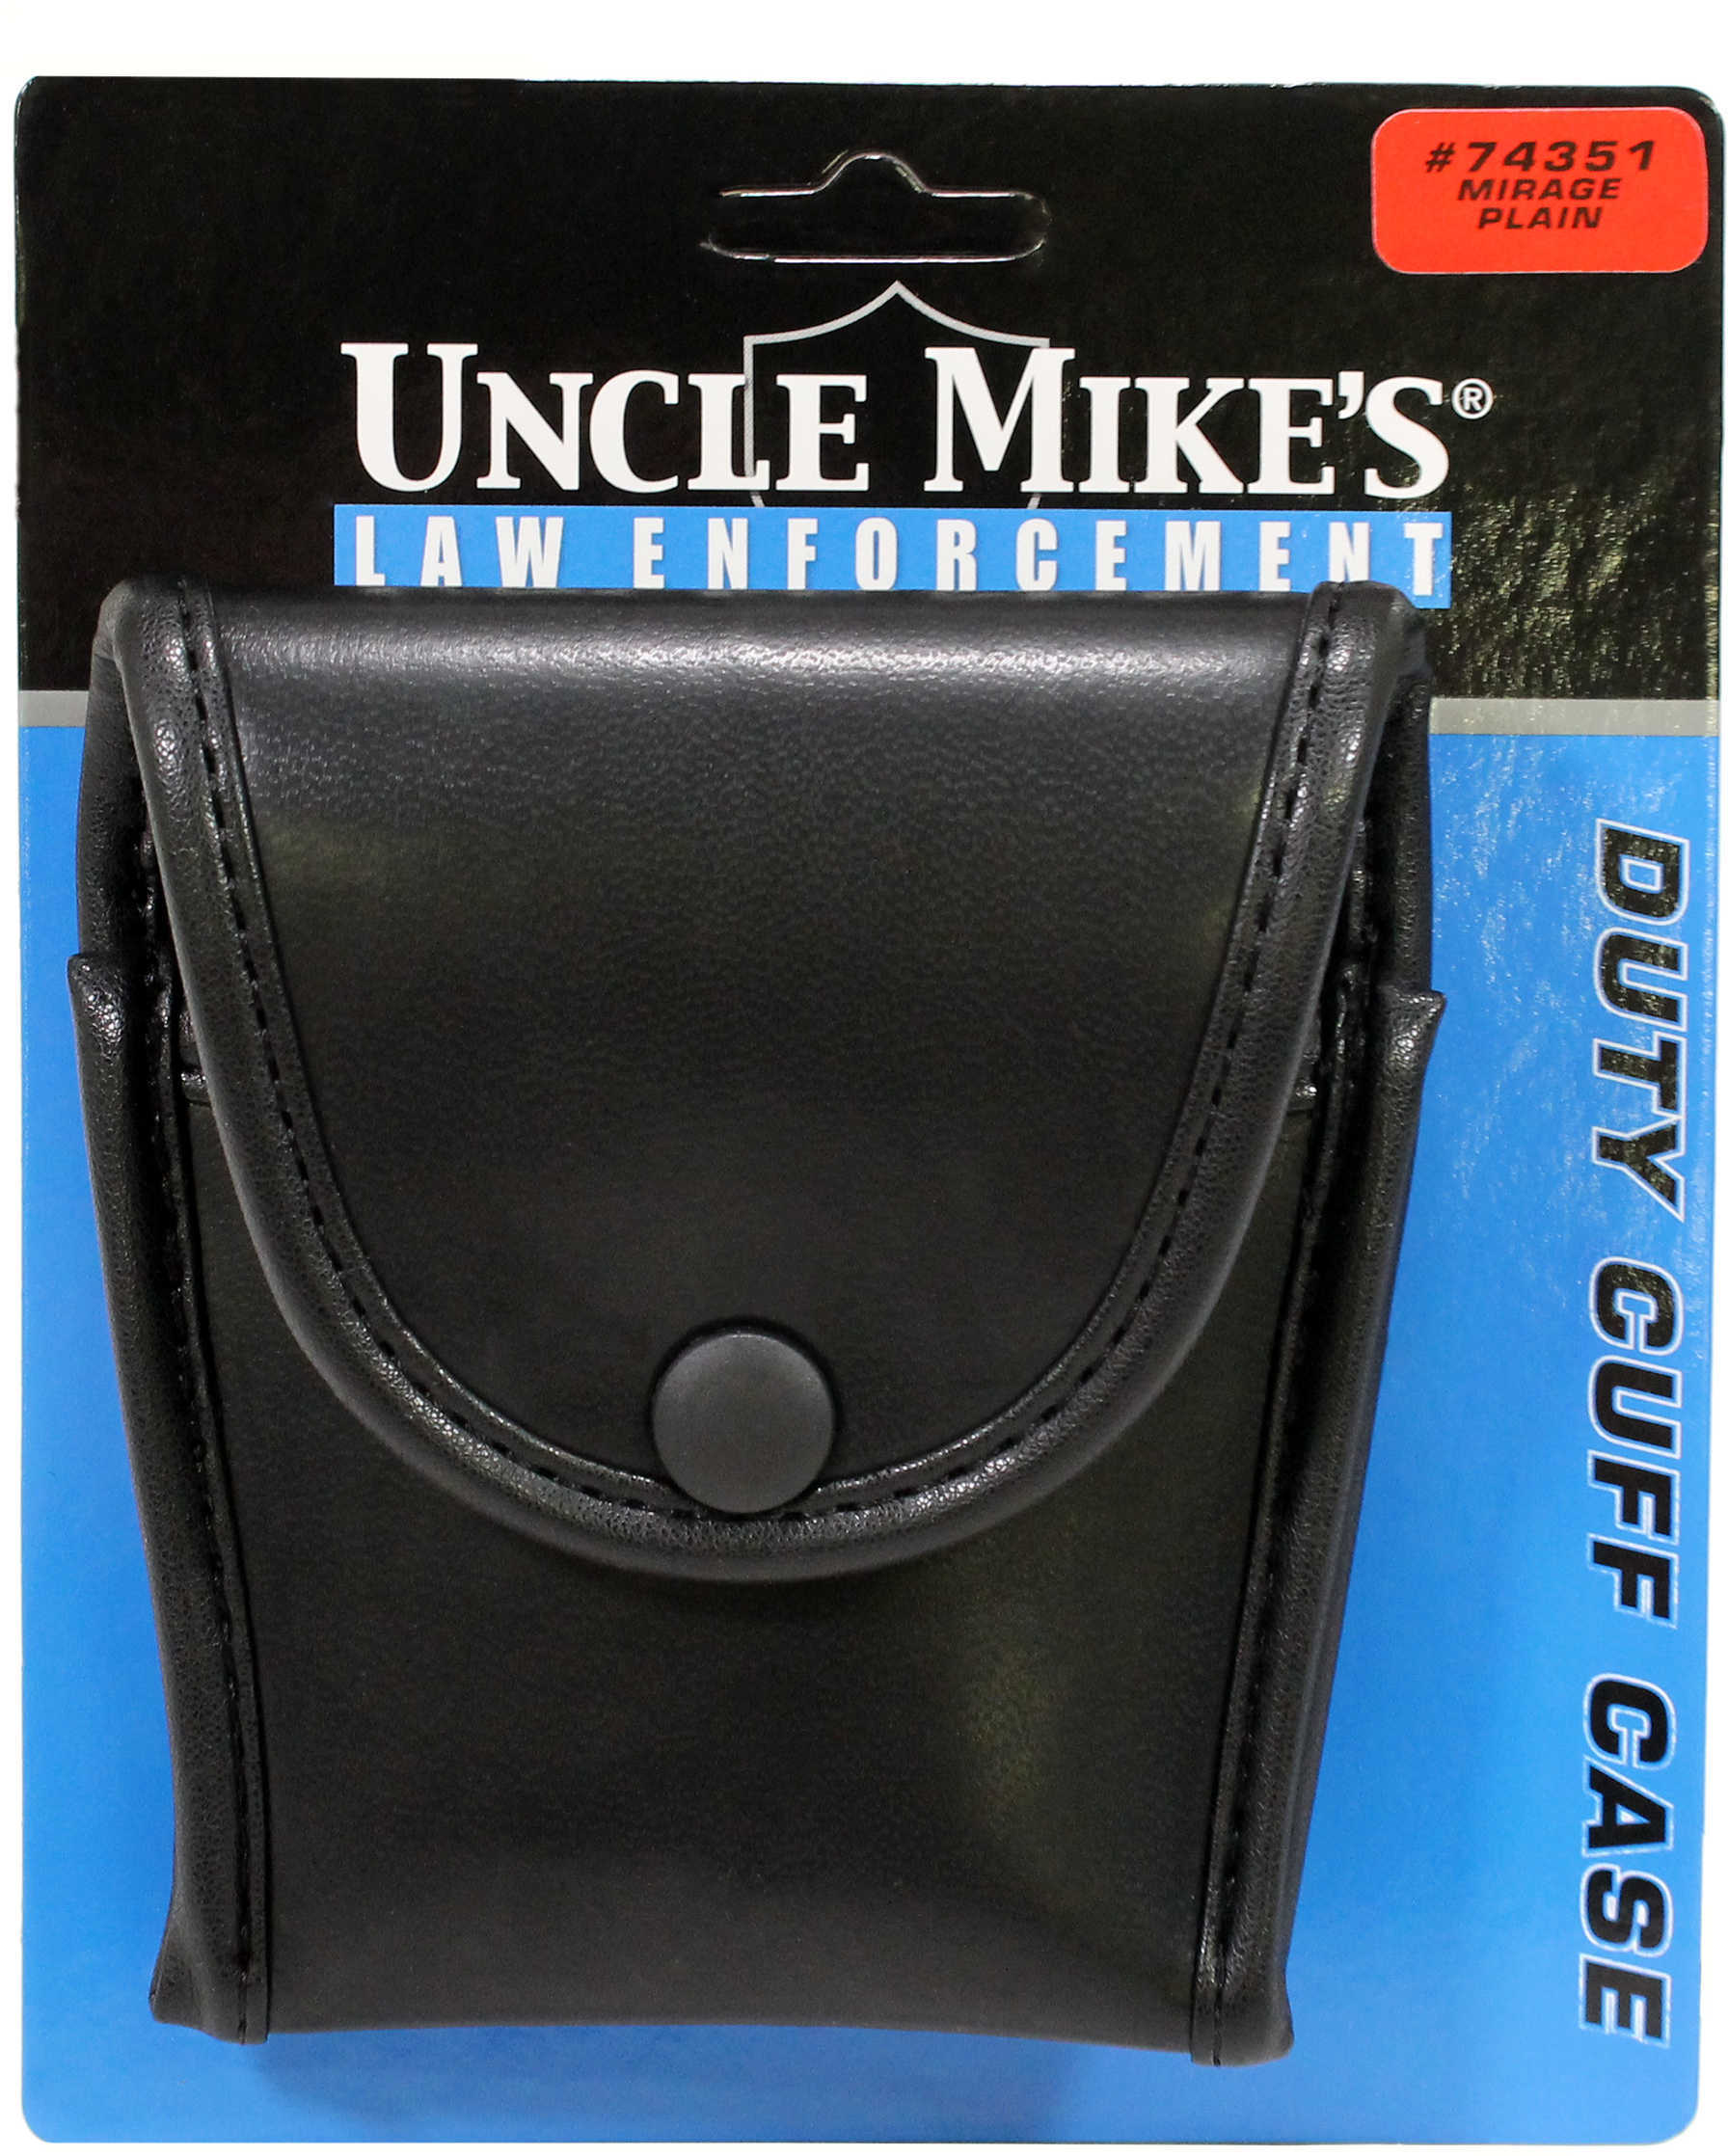 Uncle Mikes Mirage Compact Cuff Case with Flap Plain Black Md: 74351